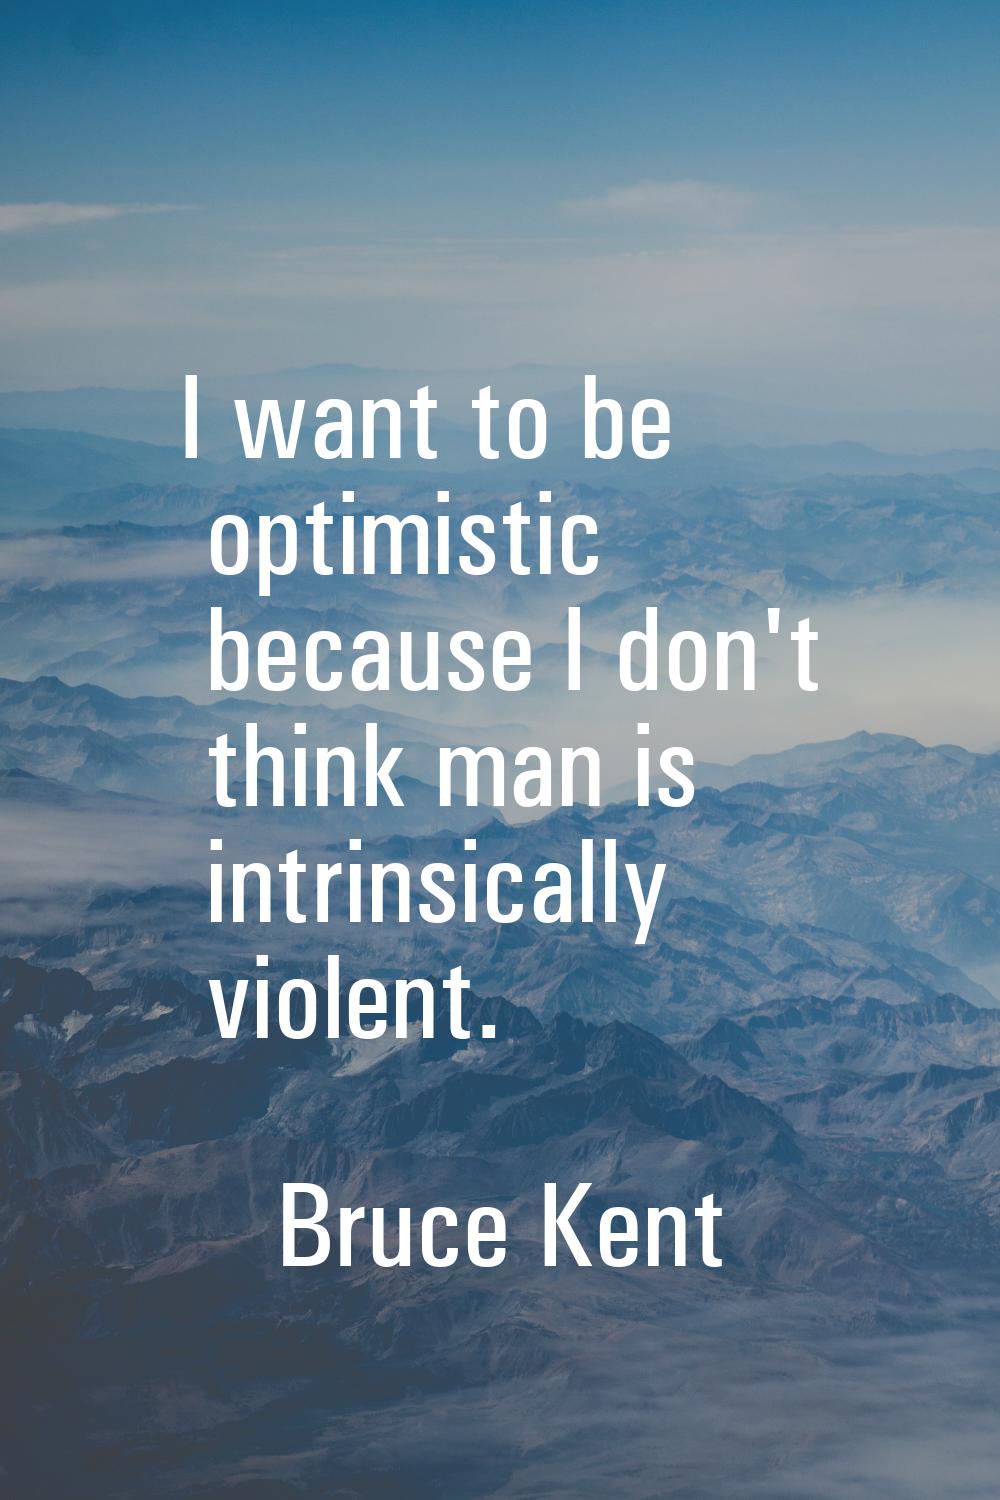 I want to be optimistic because I don't think man is intrinsically violent.